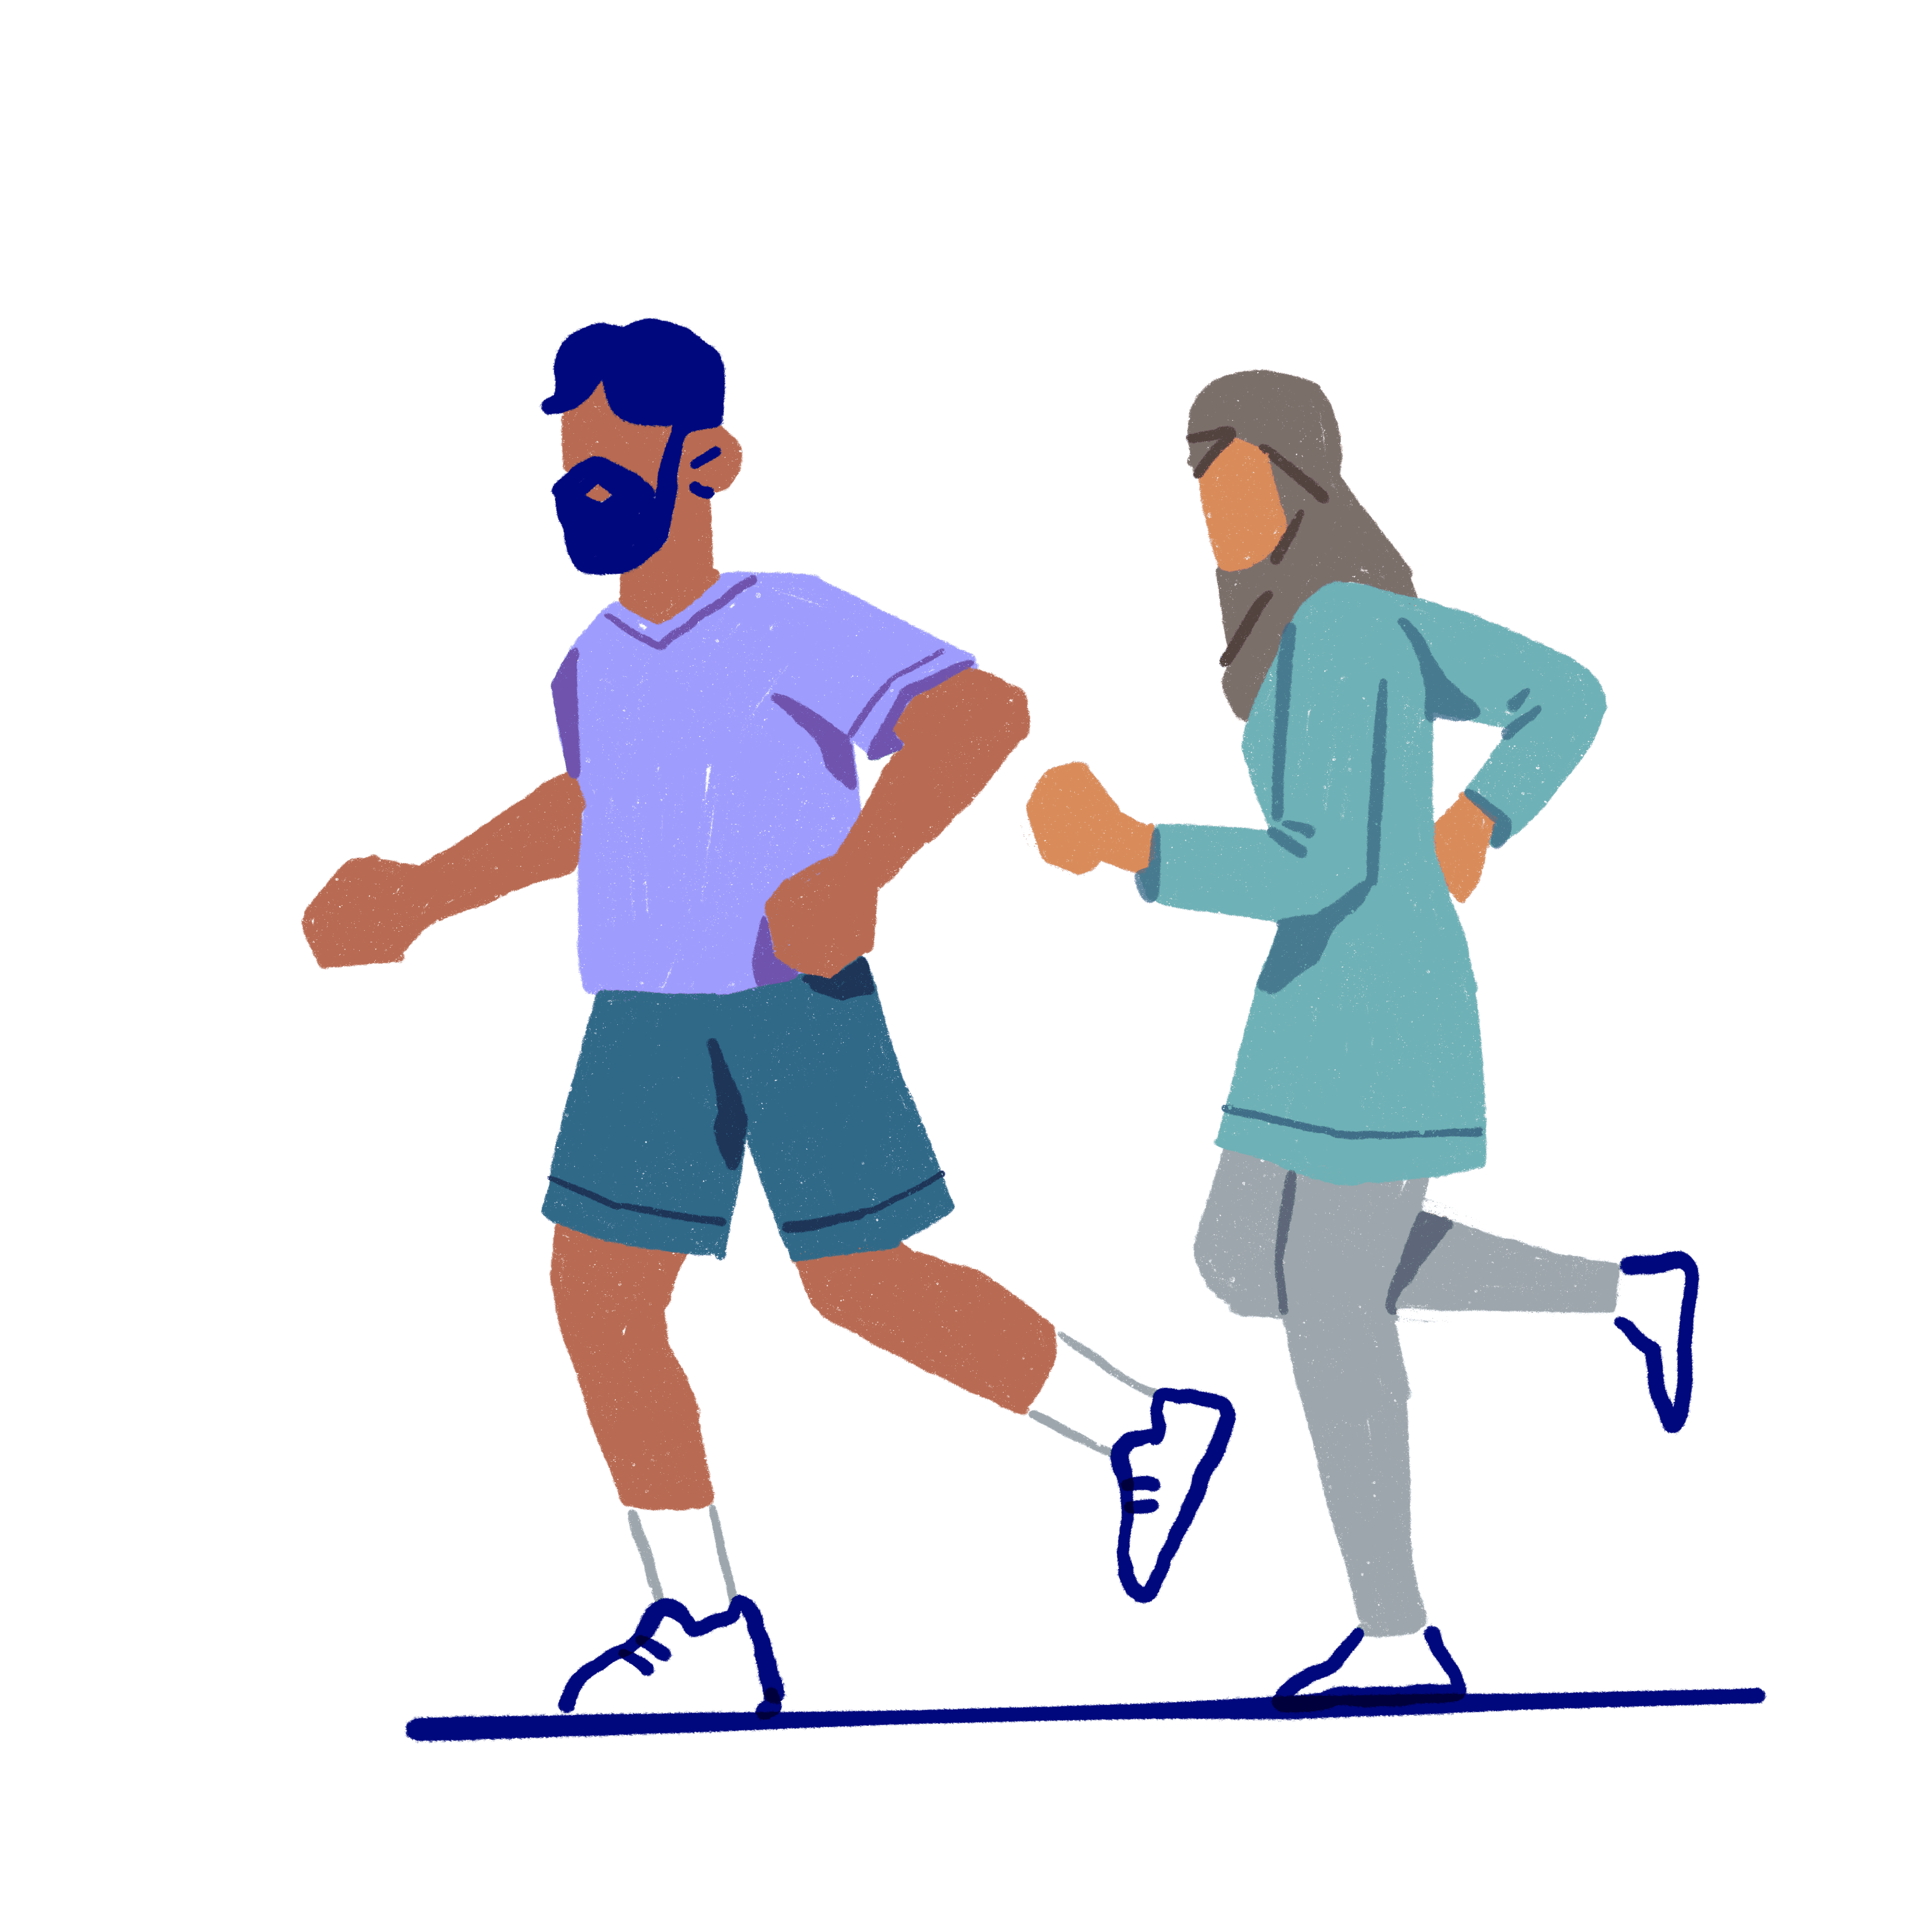 Two people running